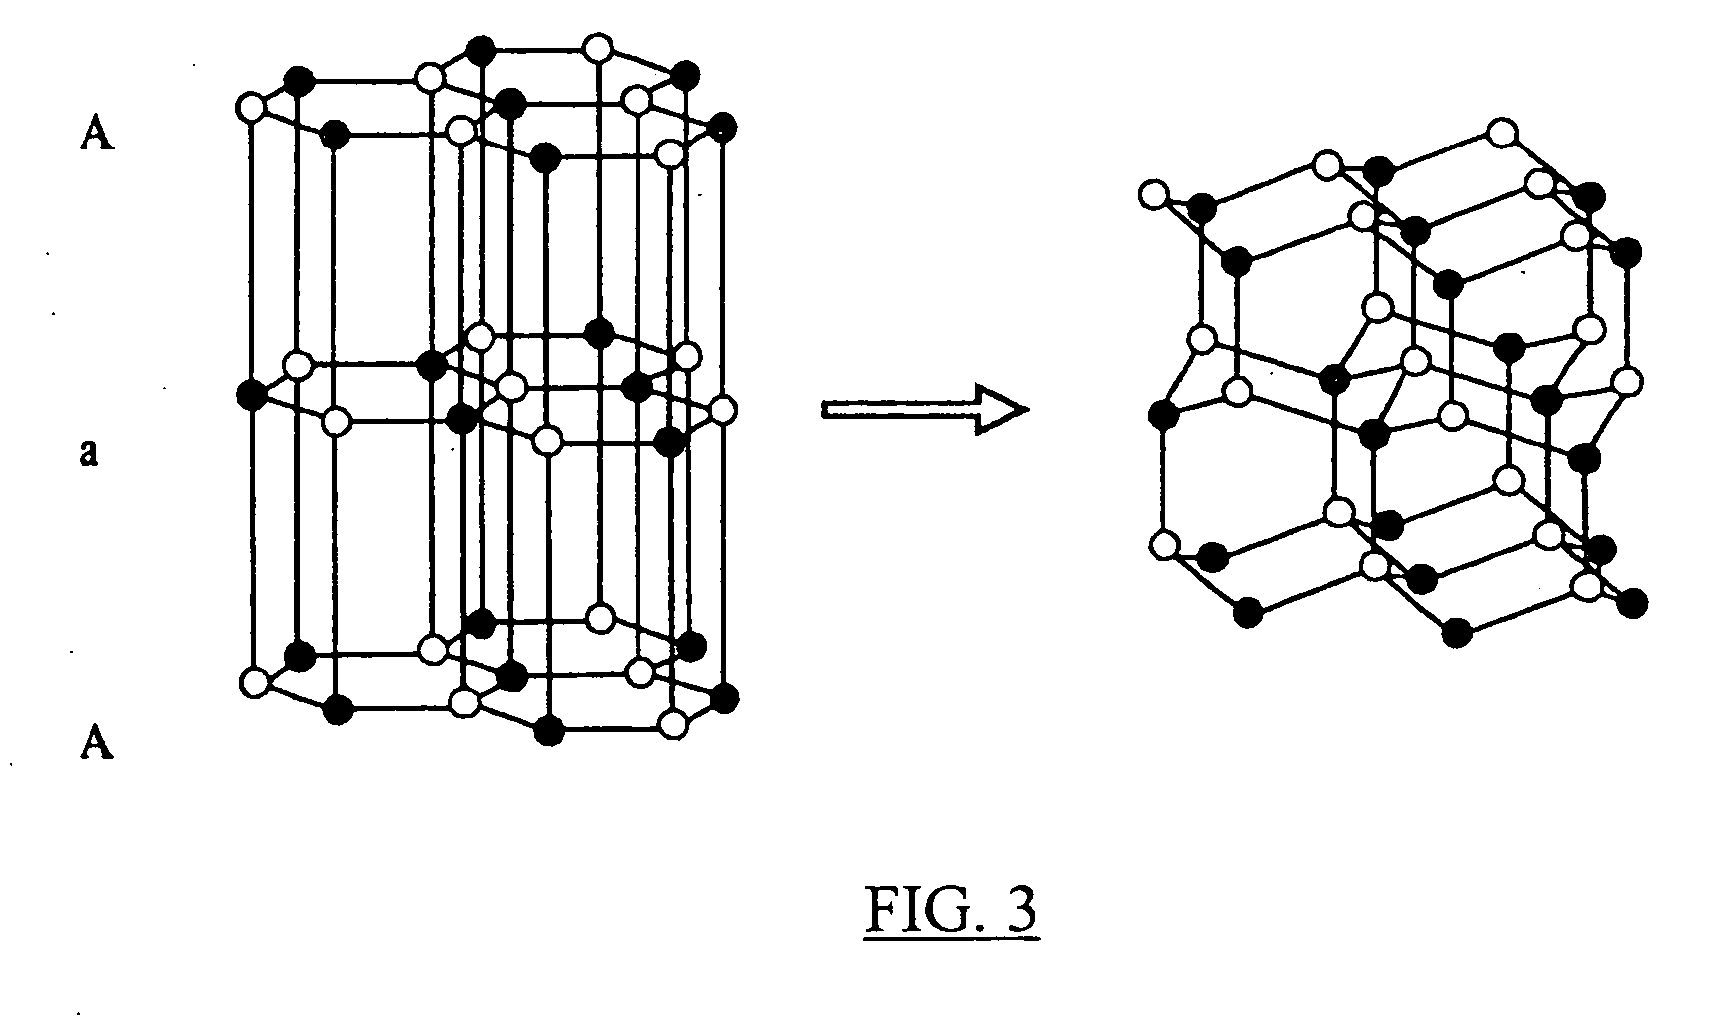 Methods of forming polycrystalline bodies using rhombohedral graphite materials